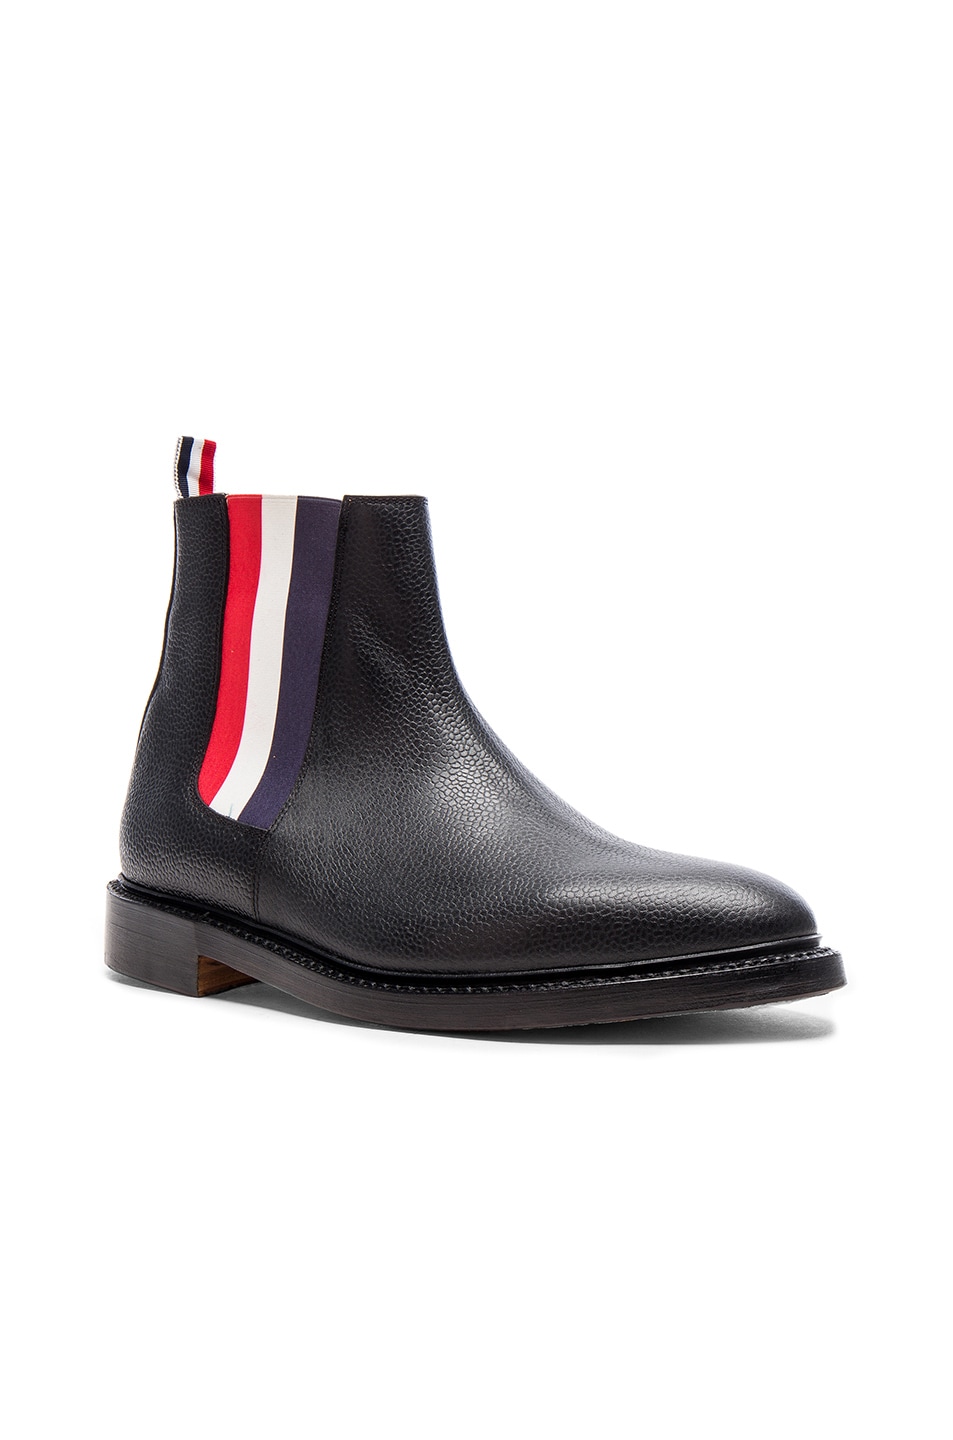 Image 1 of Thom Browne Pebble Grain Leather Chelsea Boots in Black